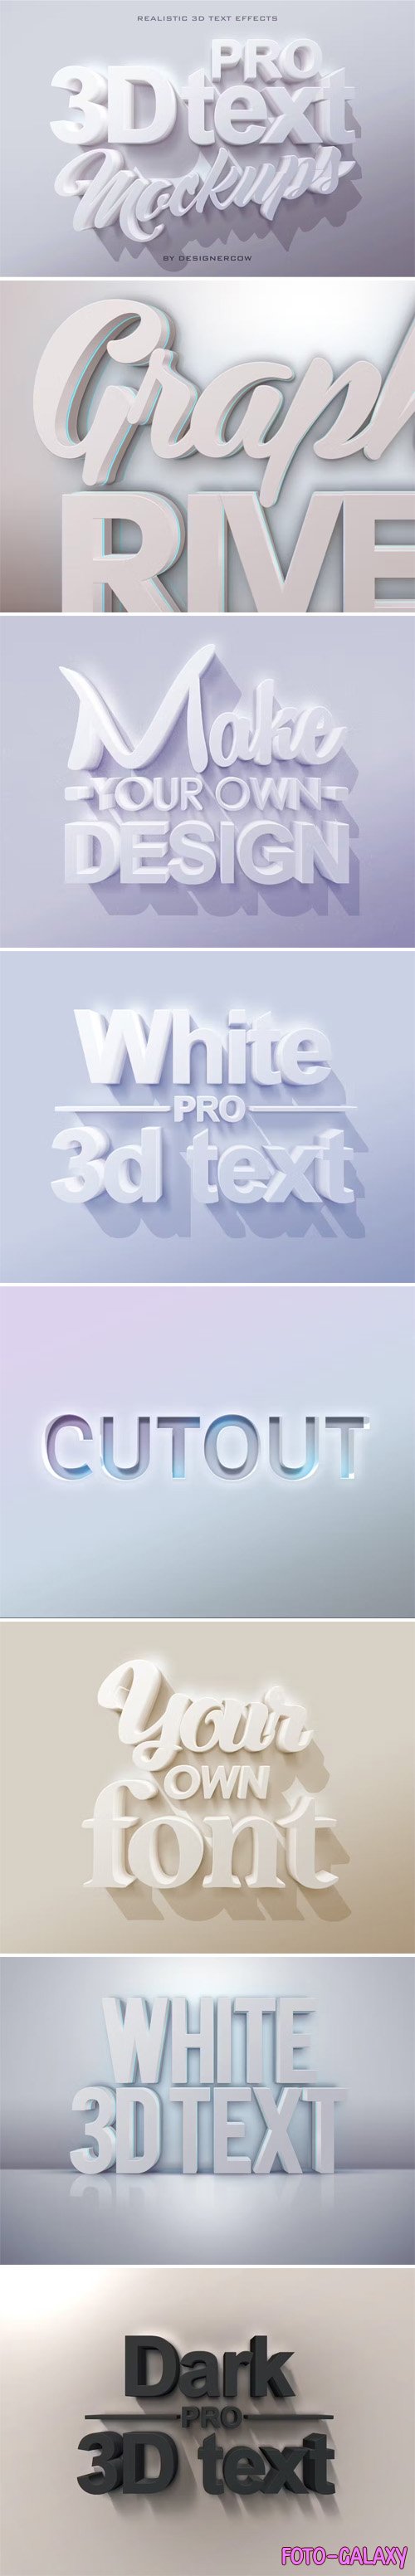 Pro 3D Text Mockups for Photoshop